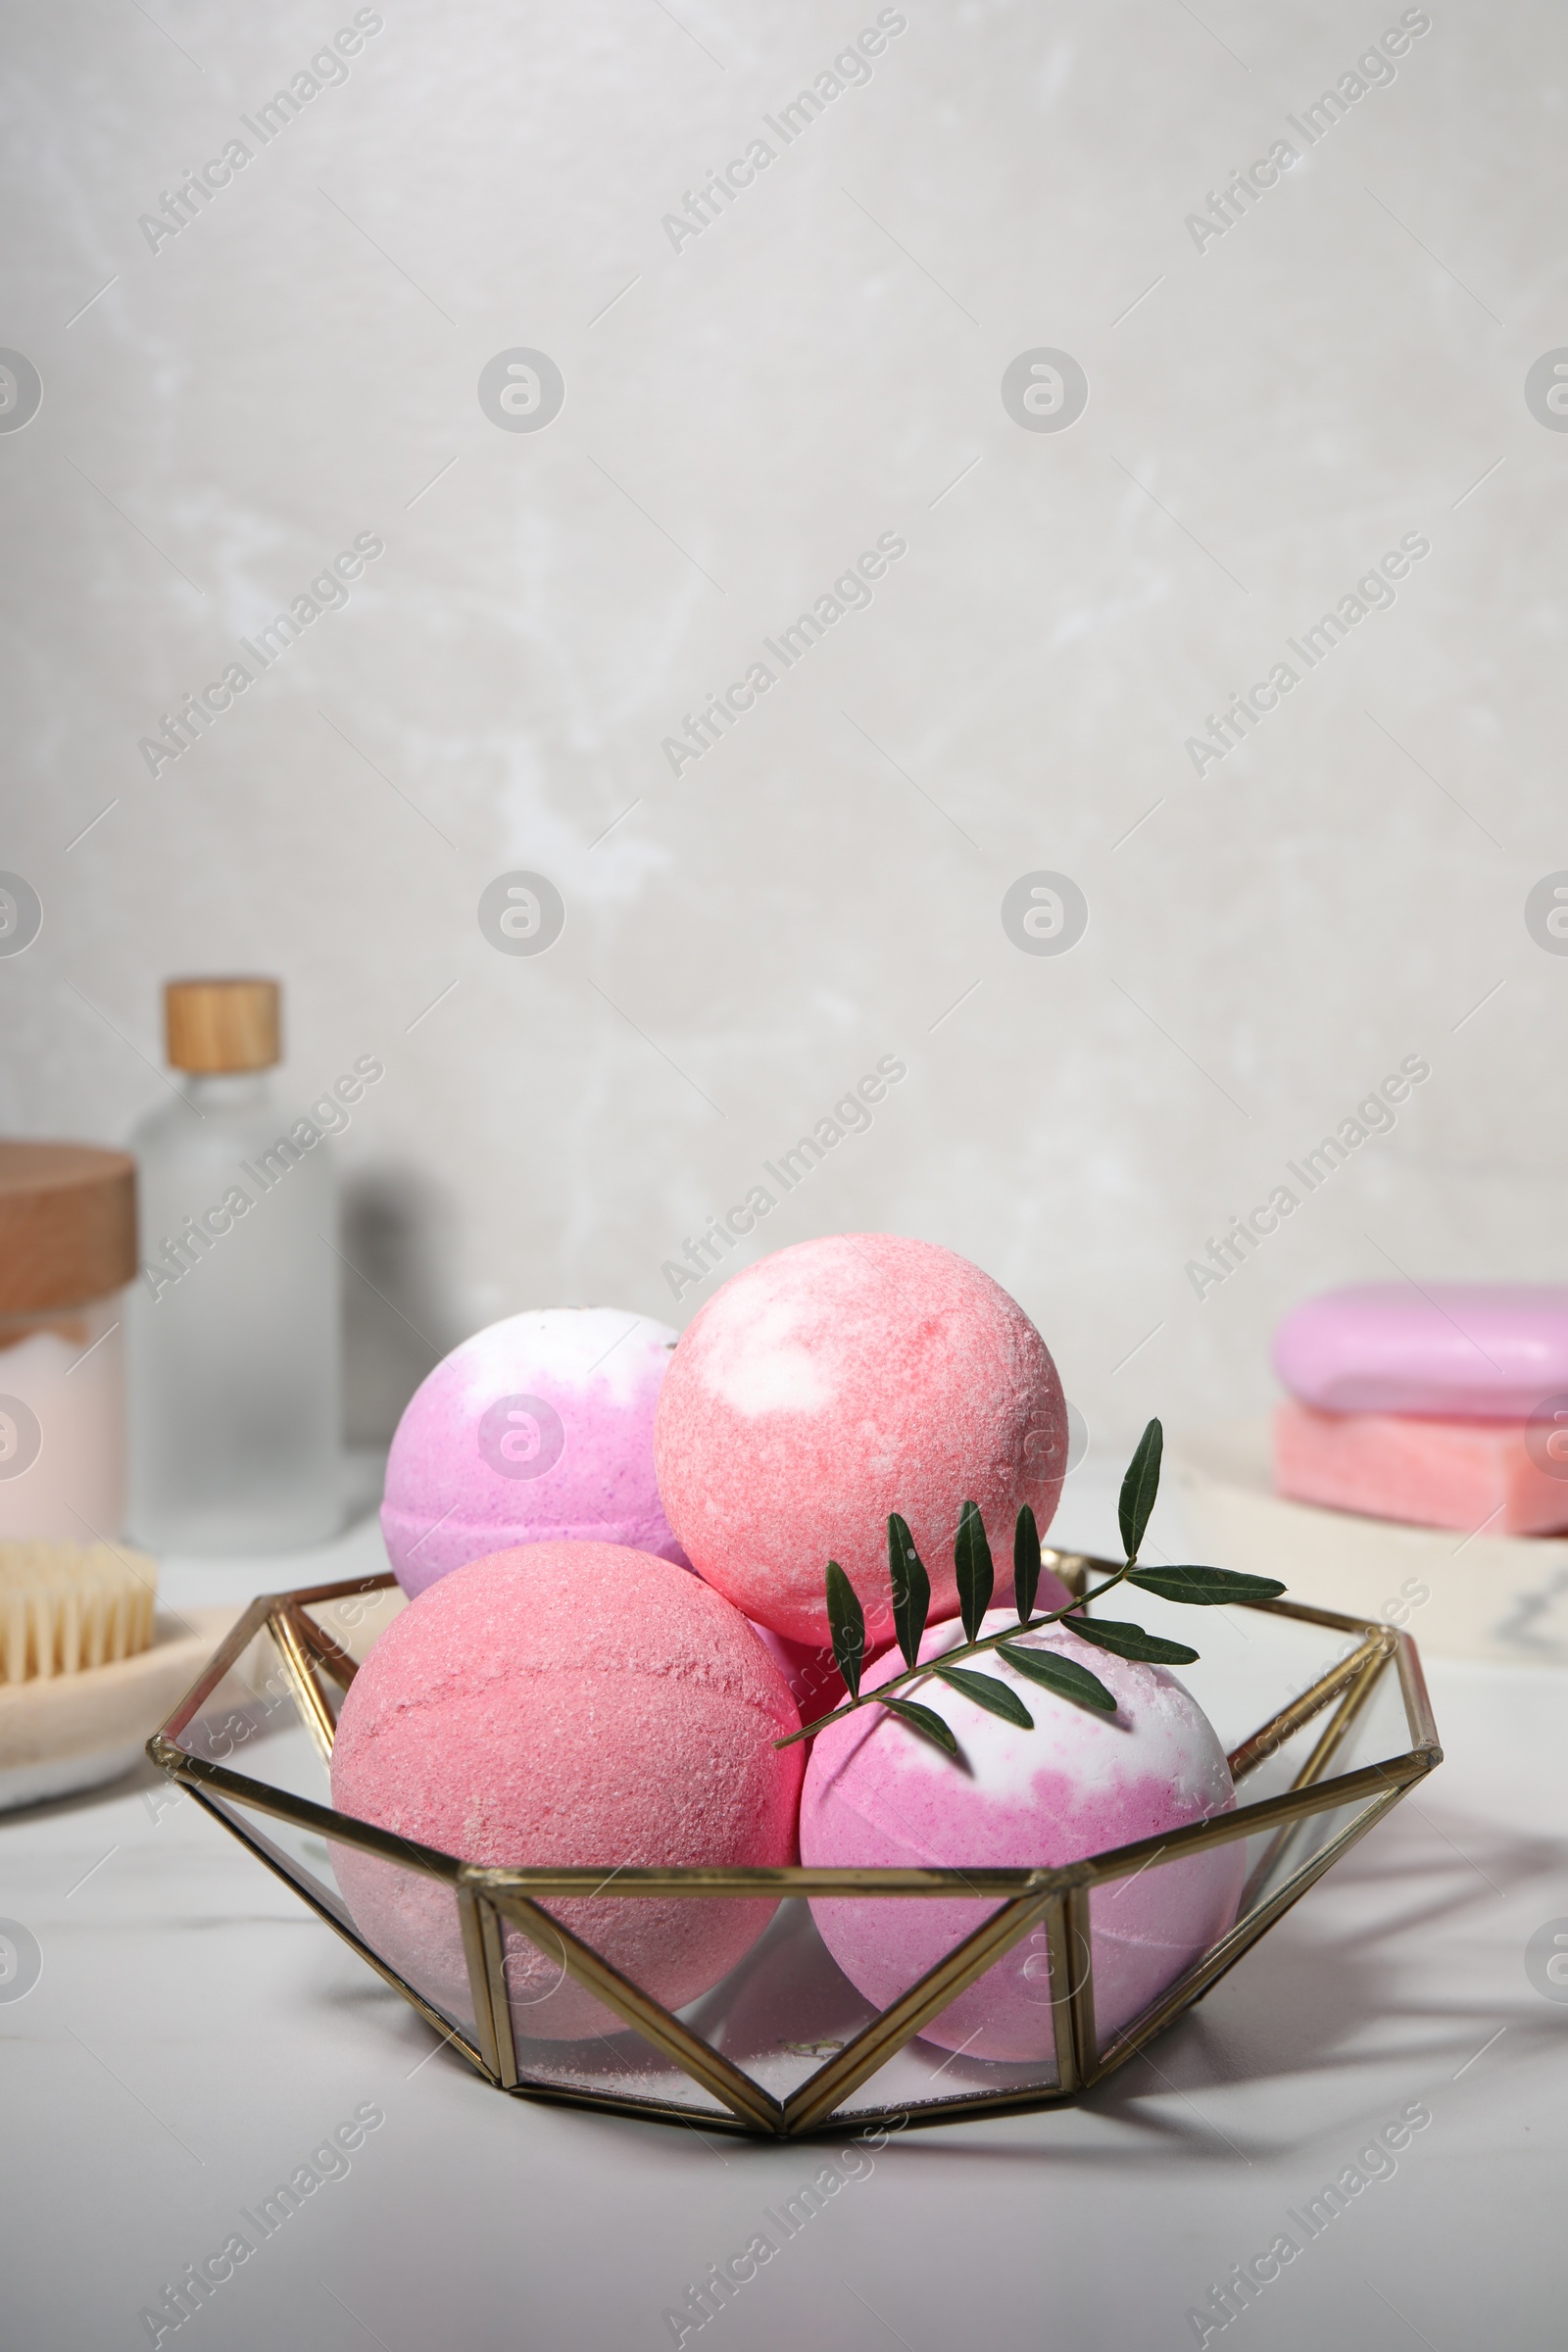 Photo of Beautiful aromatic bath bombs and green twig on white table, space for text